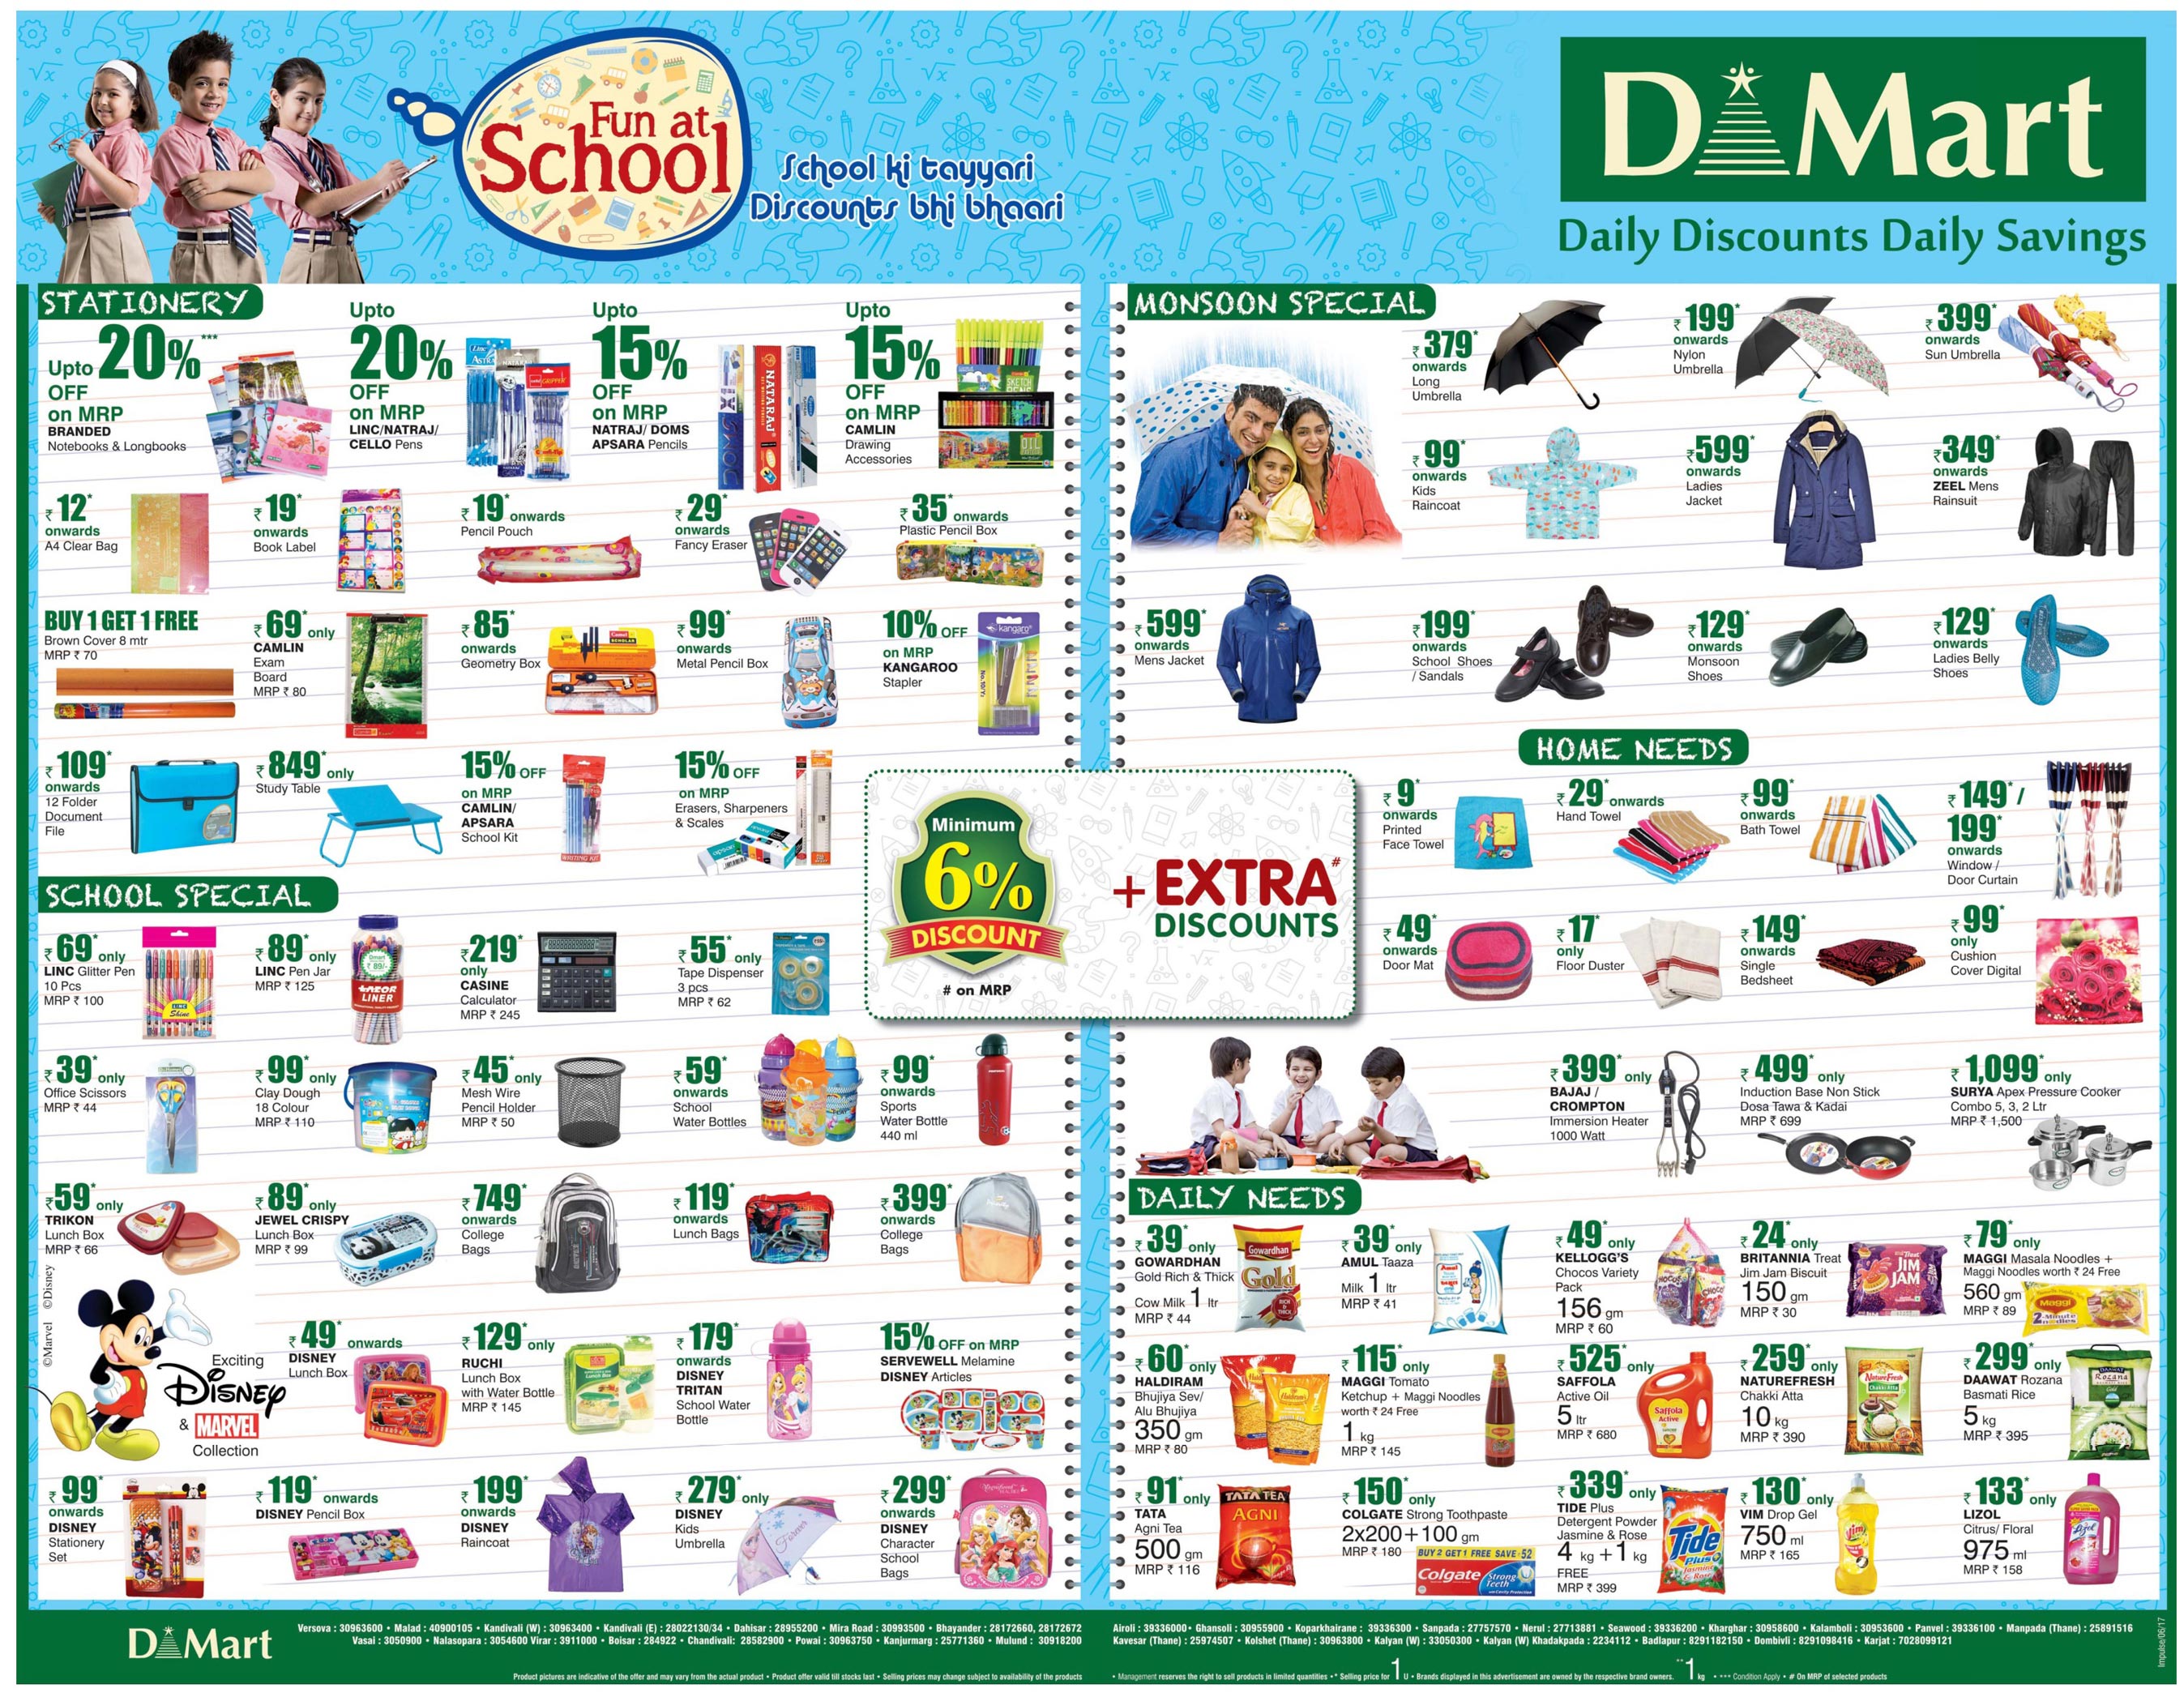 d-mart-full-page-ad-bombay-times-10-6-2017